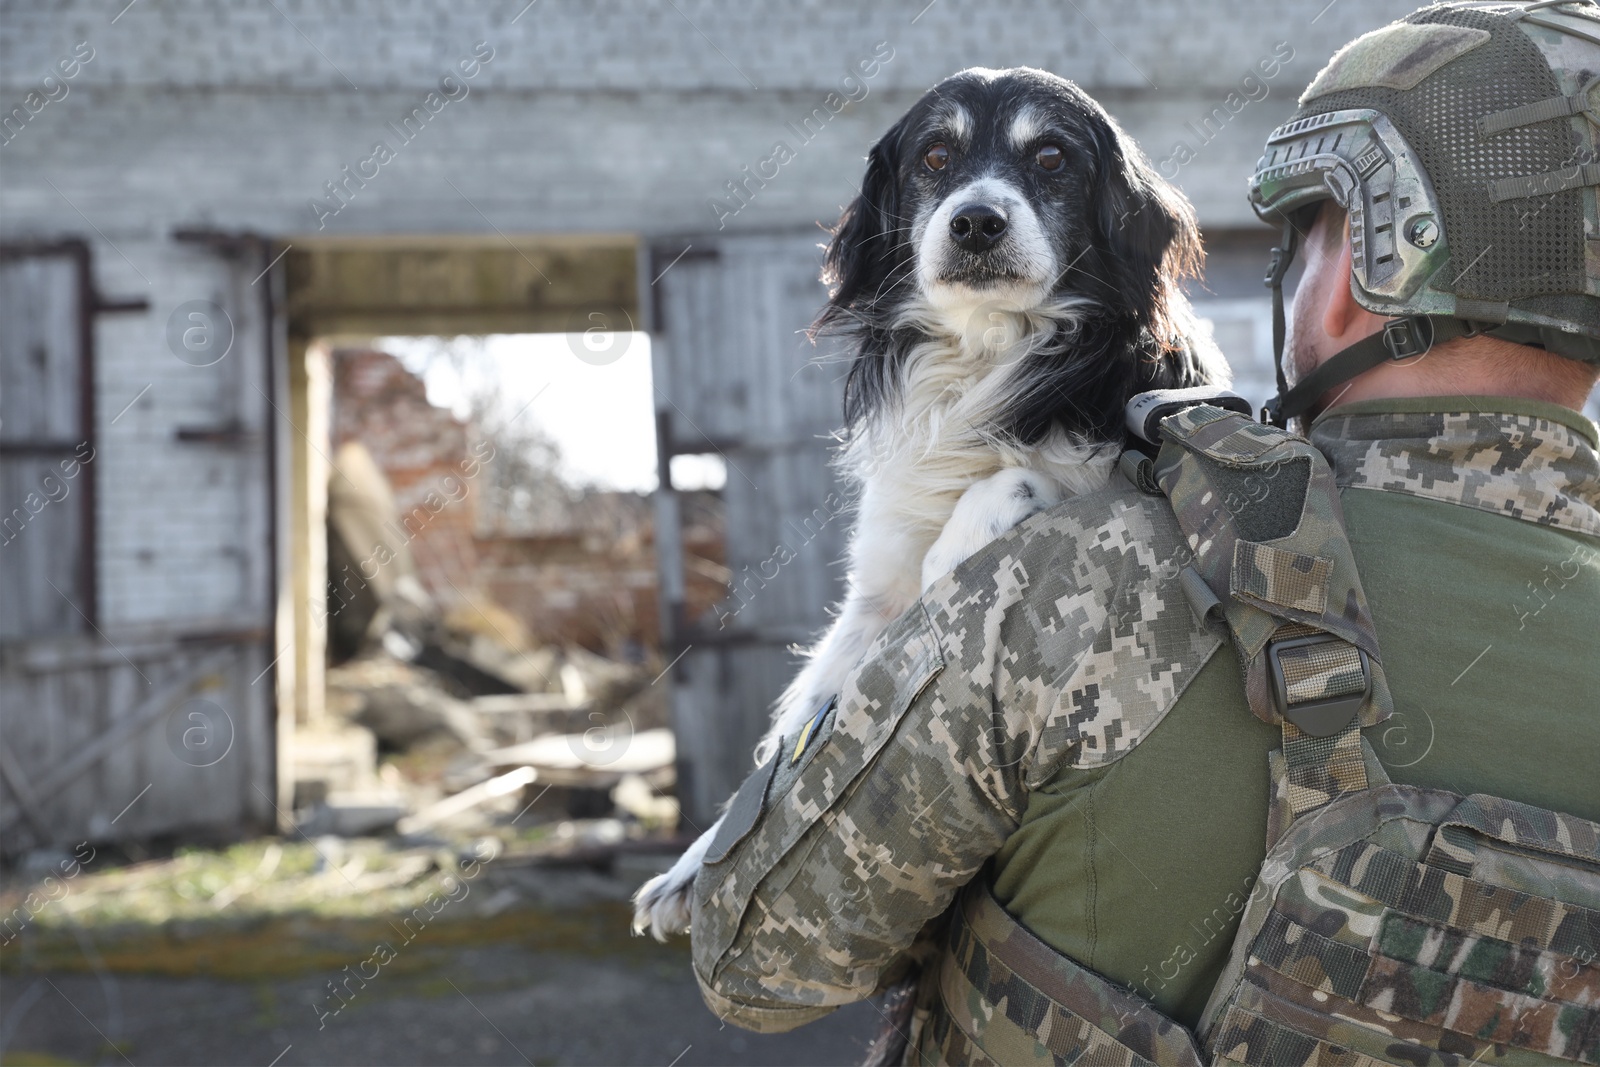 Photo of Ukrainian soldier rescuing stray dog outdoors, back view. Space for text